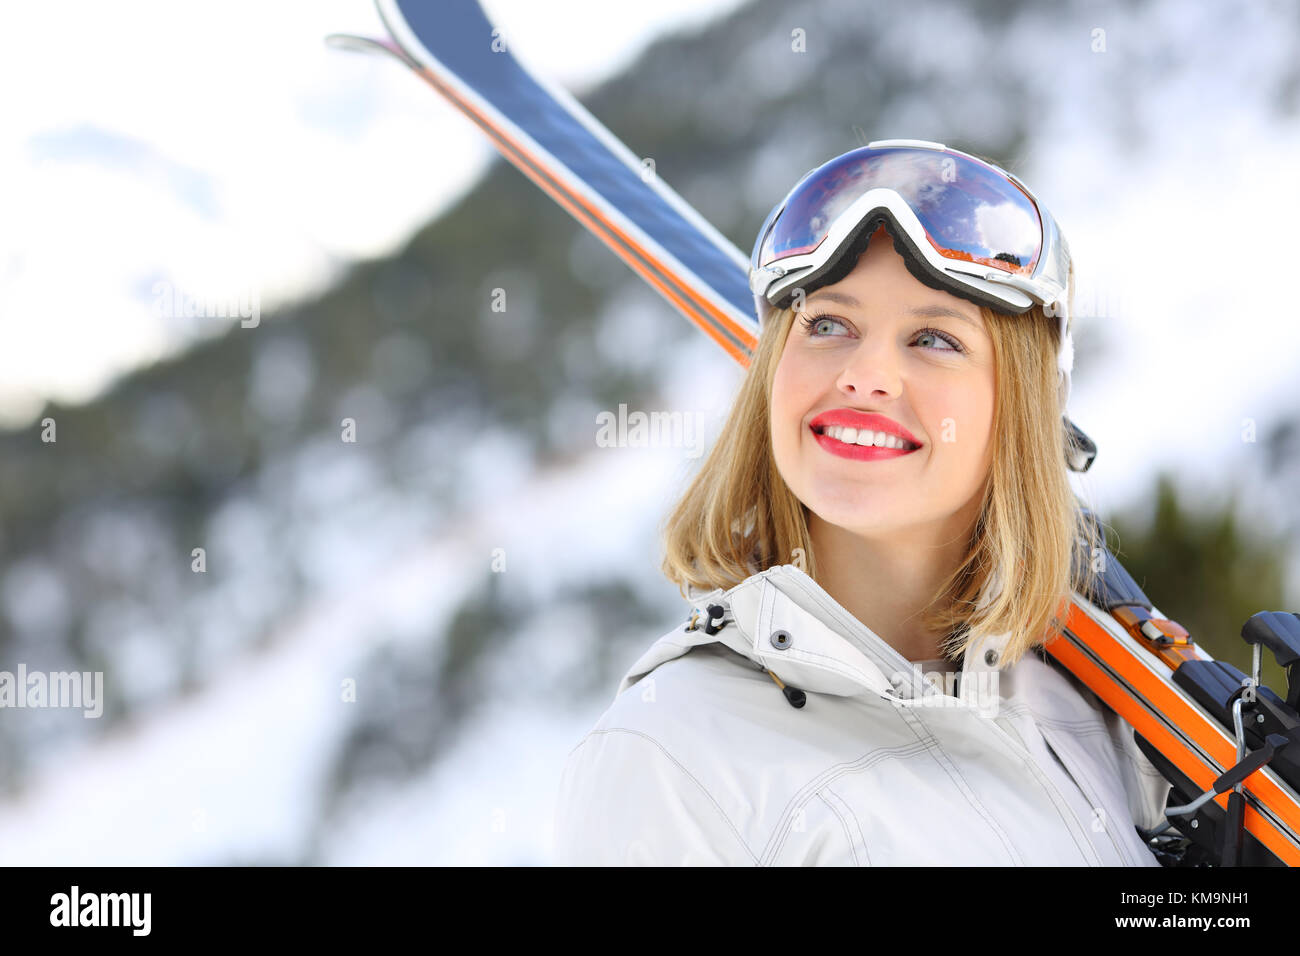 Portrait of a happy skier looking above with a snowy mountain in the background Stock Photo